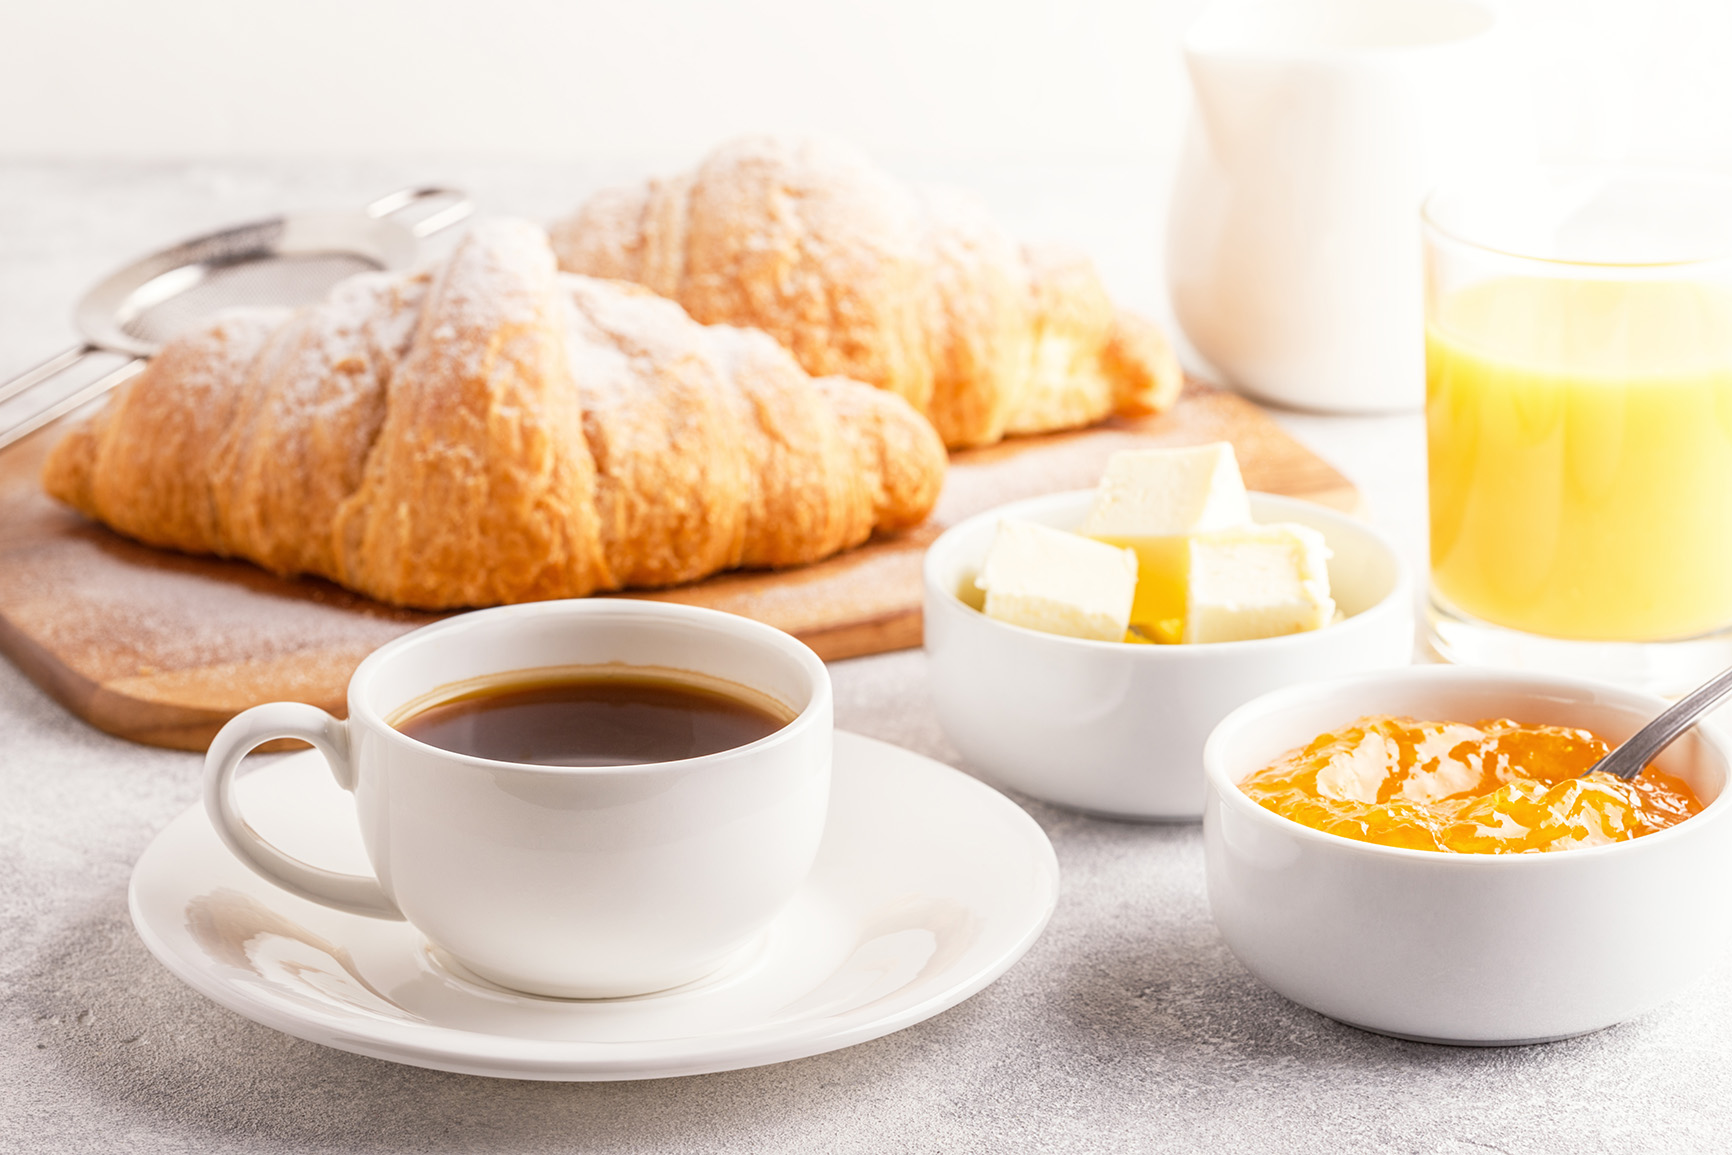 Continental,Breakfast,With,Fresh,Croissants,,Orange,Juice,And,Coffee,,Selective